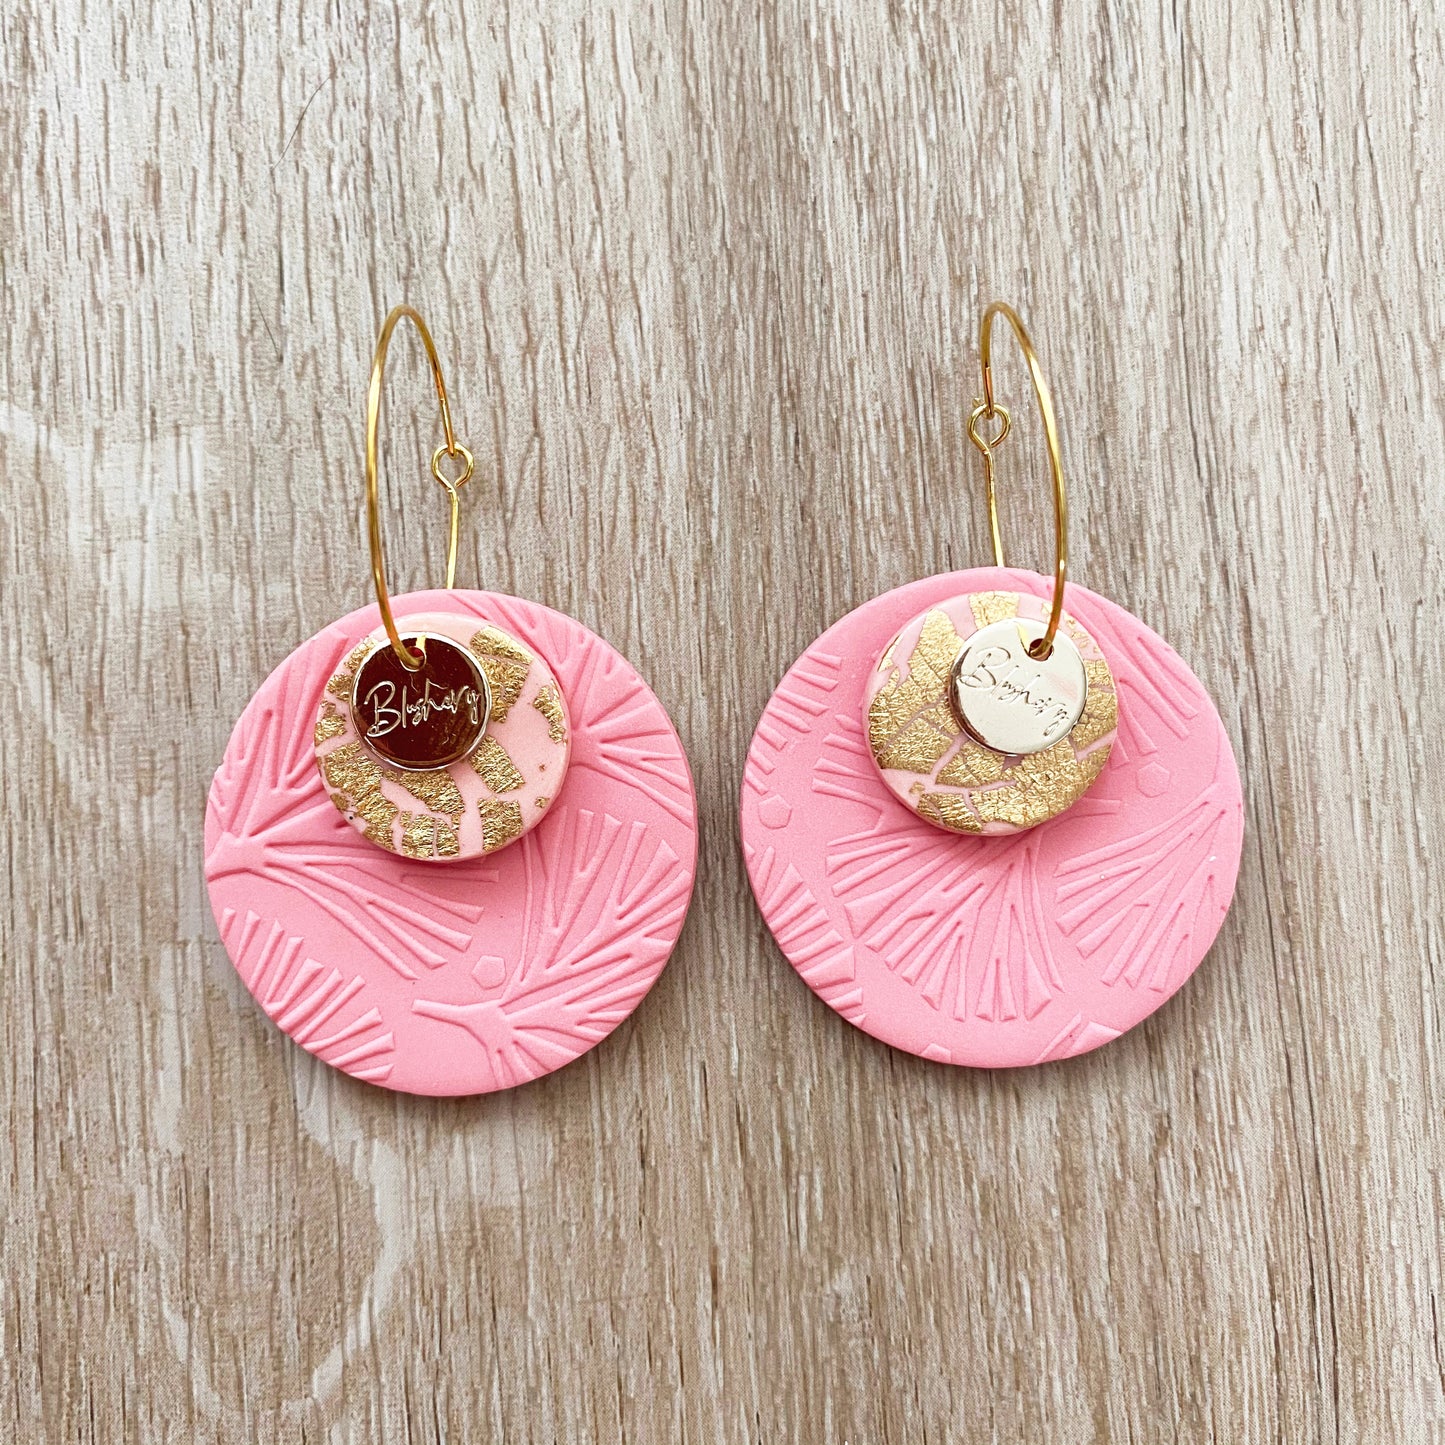 3 round discs on a hoop earring in coral pink and gold